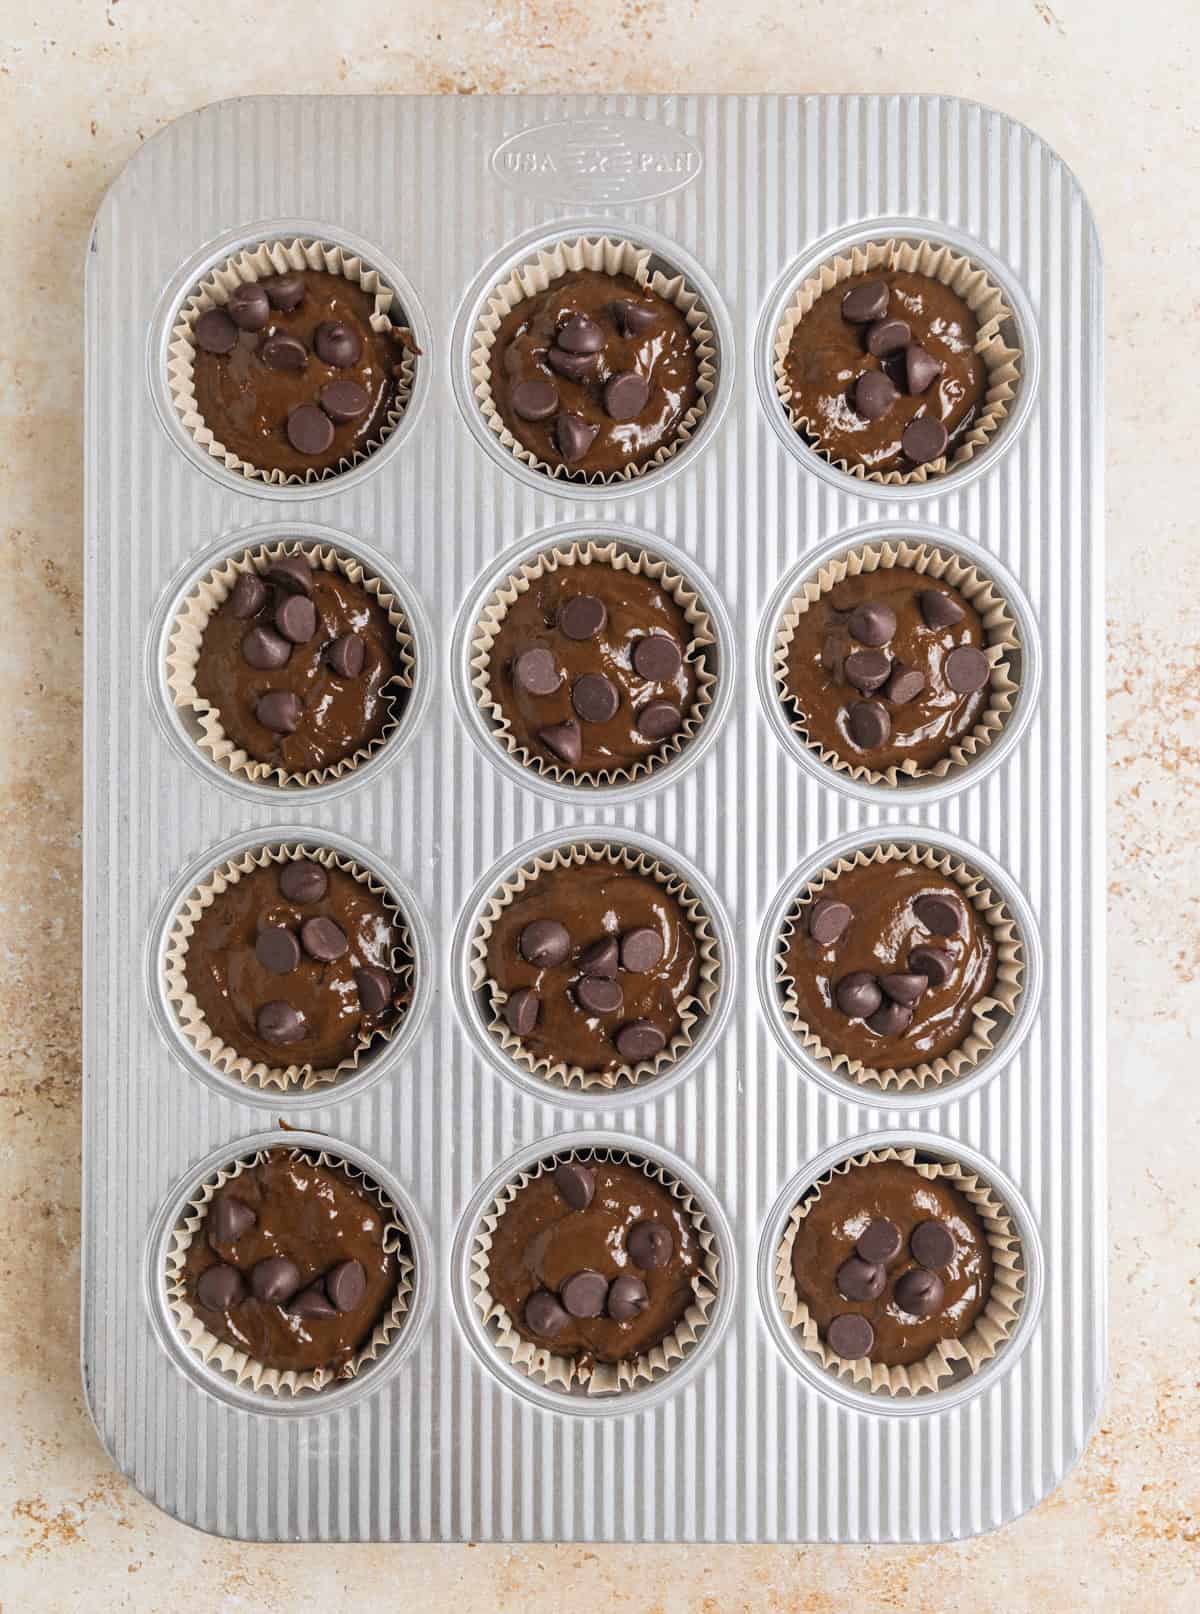 Muffin batter scooped in muffin pan with chocolate chips on top.